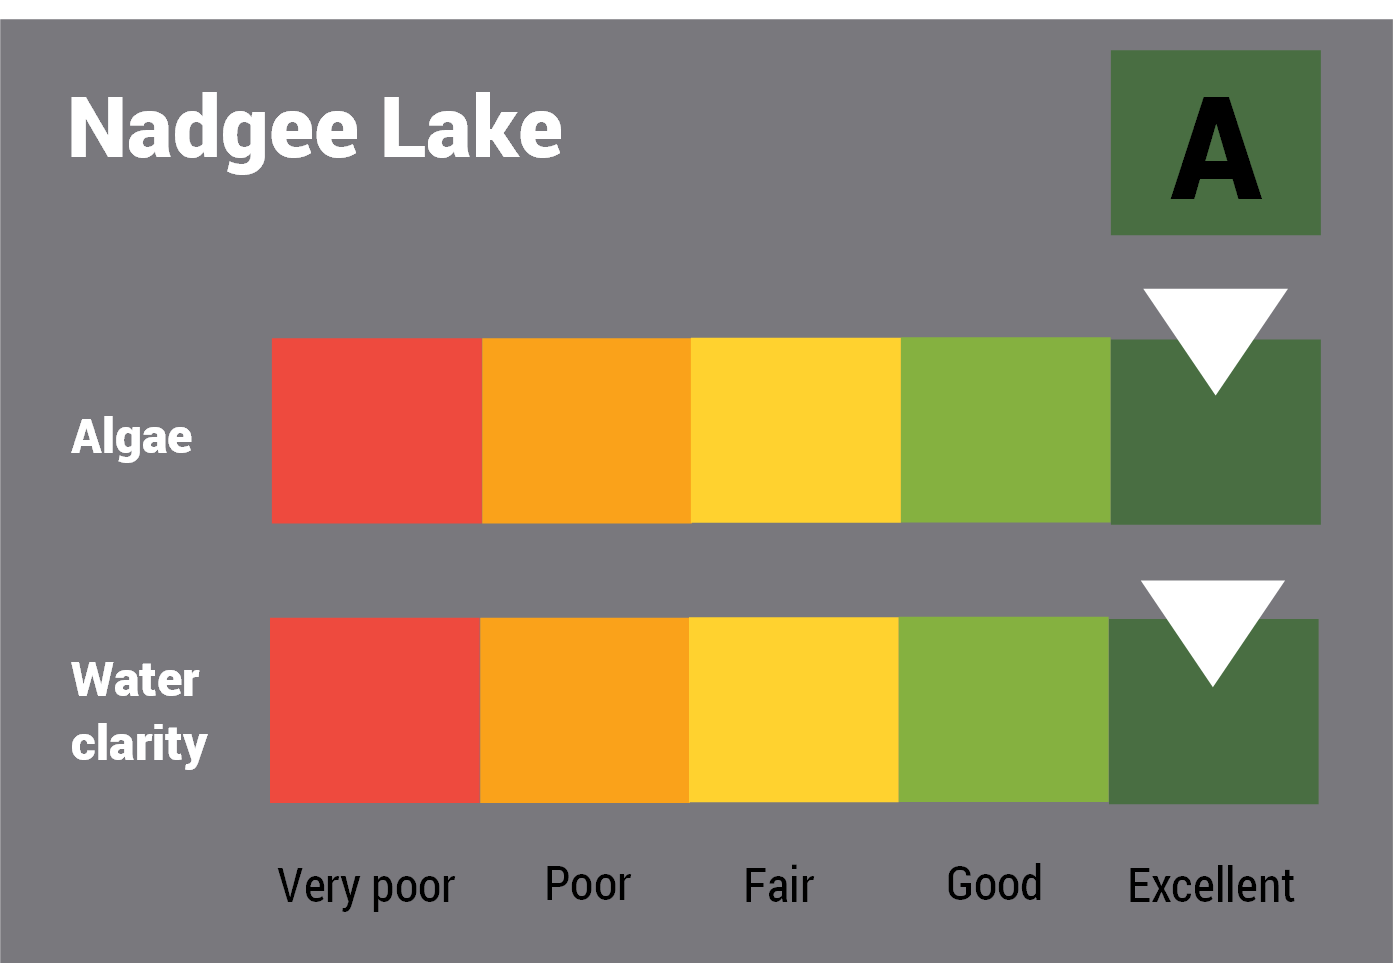 Nadgee Lake water quality report card for algae and water clarity showing colour-coded ratings (red, orange, yellow, light green and dark green, which represent very poor, poor, fair, good and excellent, respectively). Algae is rated 'excellent' and water clarity is rated 'excellent' giving an overall rating of 'excellent' or 'A'.